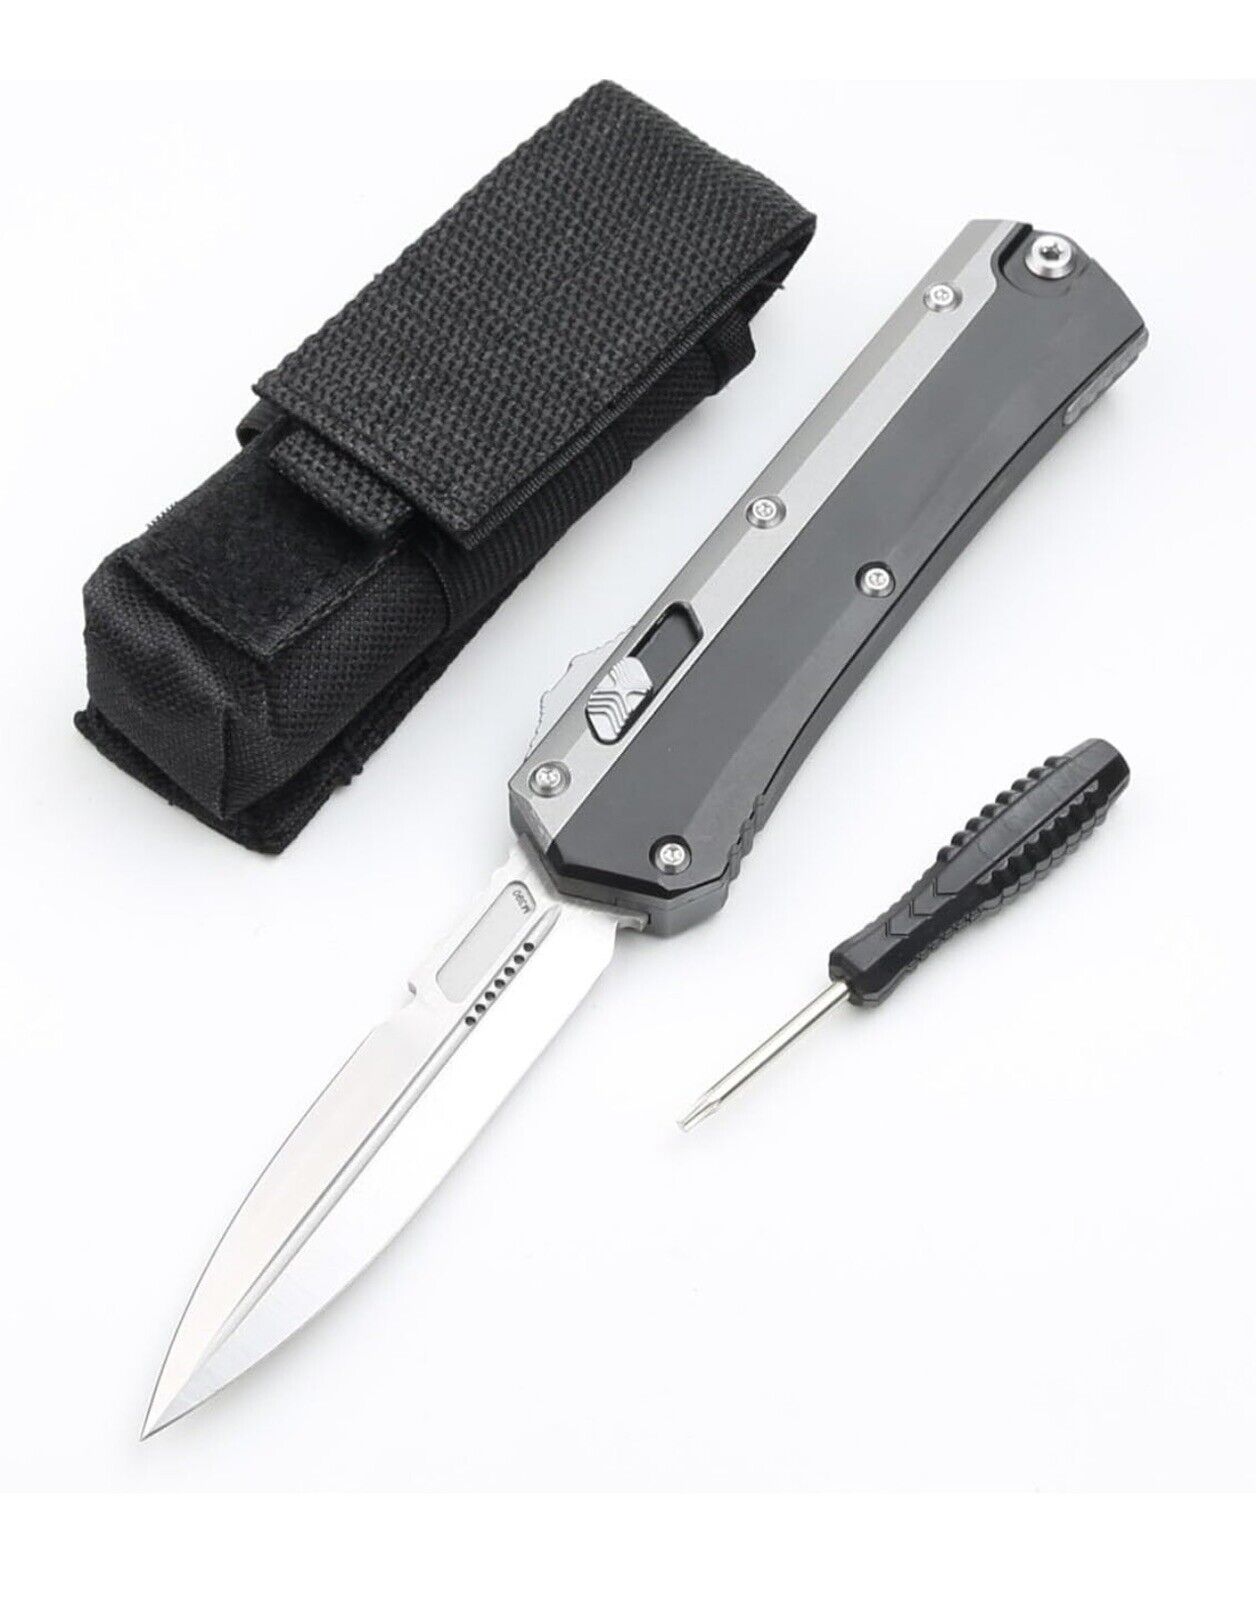 Outdoor camping pocket knife 3.5” SALE  Last One